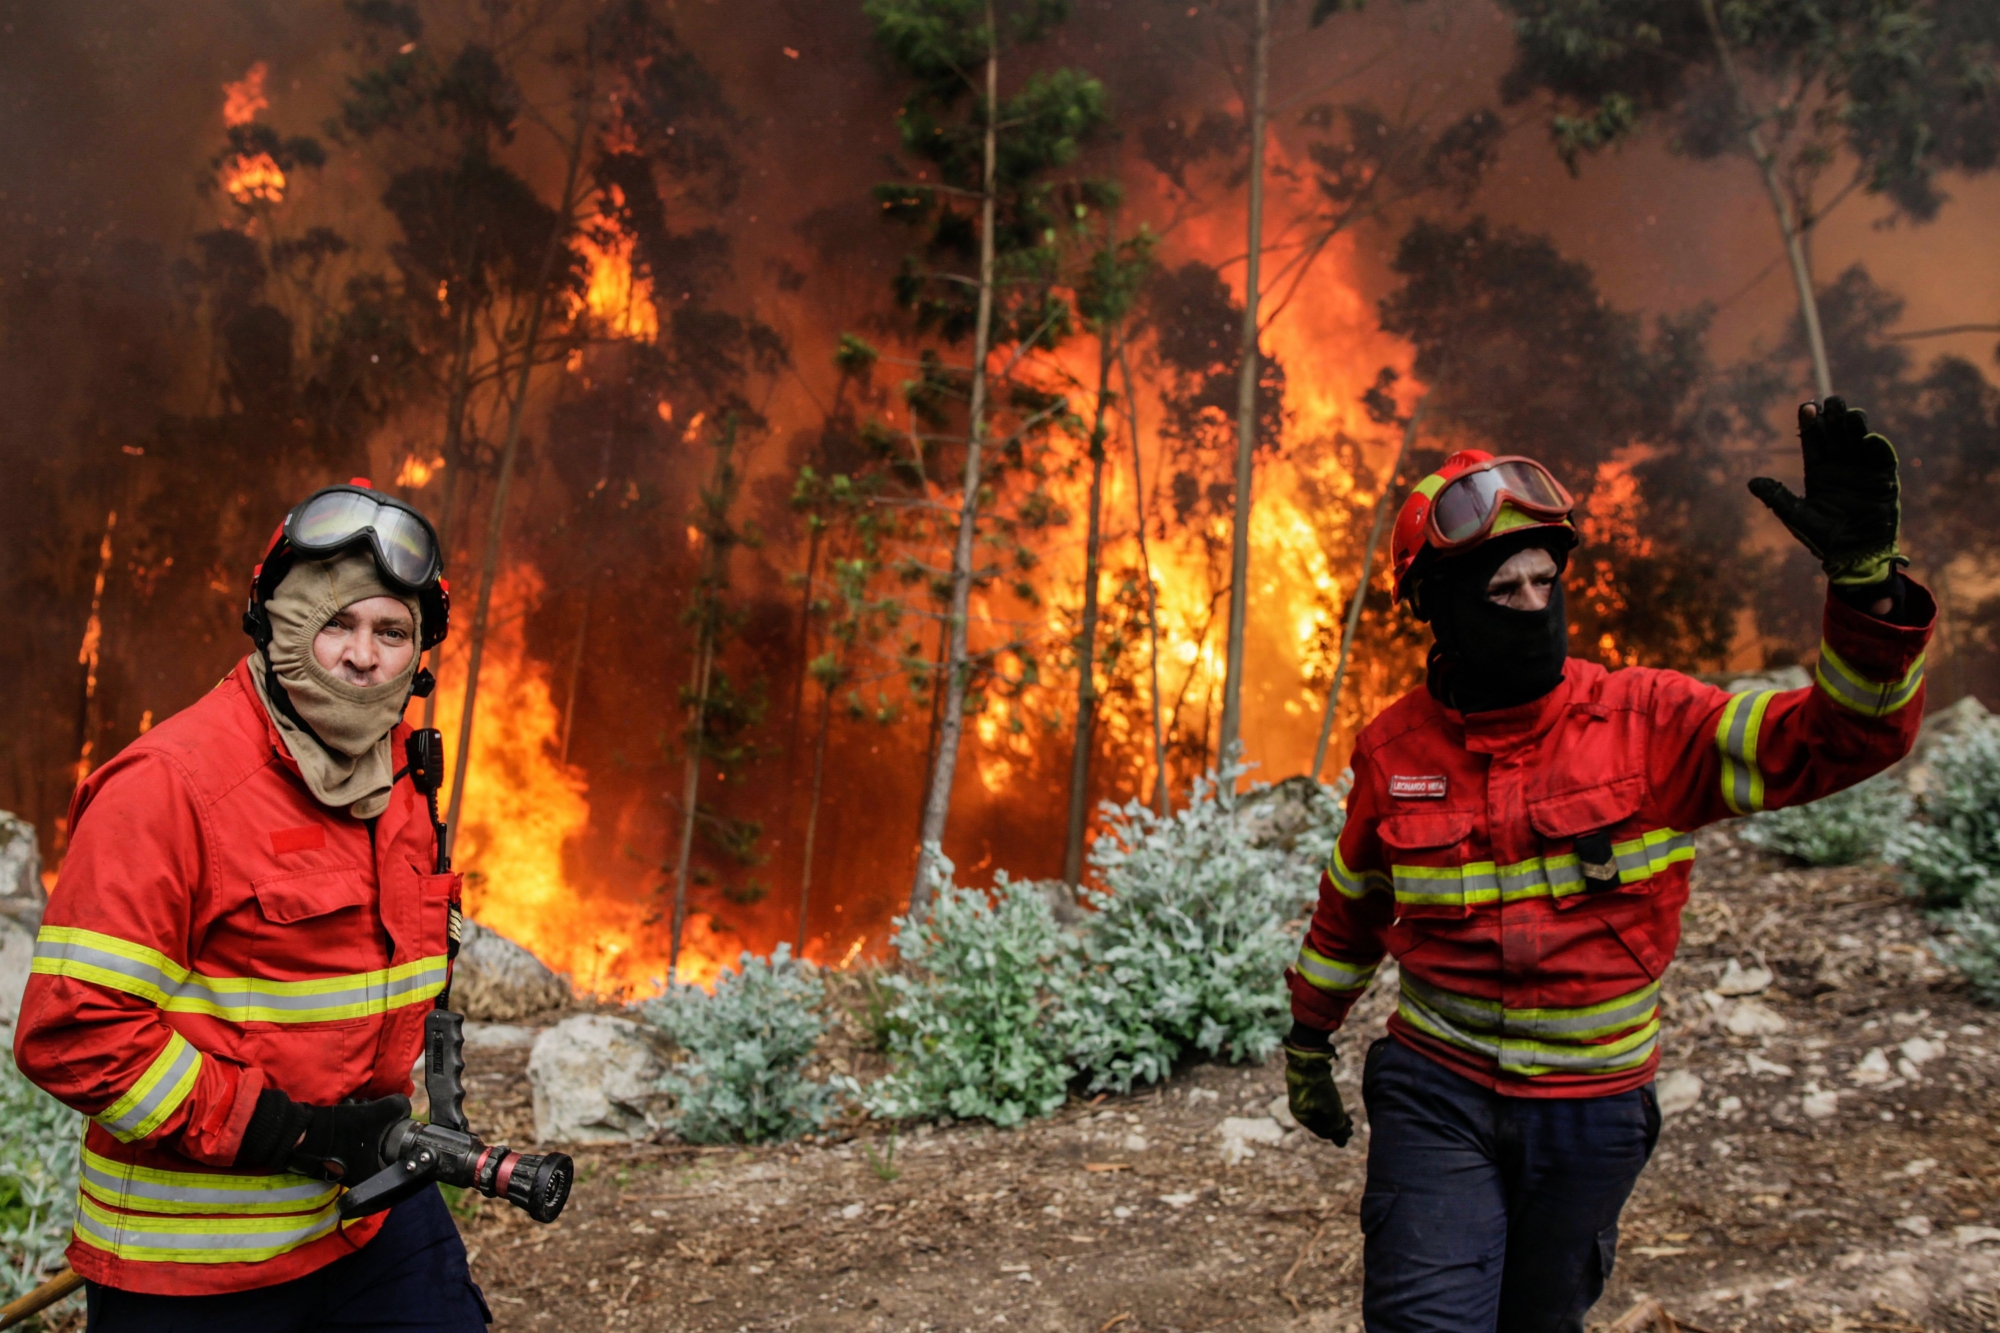 epa06035625 Firefighters battle with a forest fire in Vale das Porcas, Alvaiazere, central Portugal, 18 June 2017. At least sixty two people have been killed in forest fires in central Portugal, with many being trapped in their cars as flames swept over a road on the evening of 17 June 2017. A total of 733 firefighters are providing assistance.  EPA/PAULO CUNHA PORTUGAL FOREST FIRES